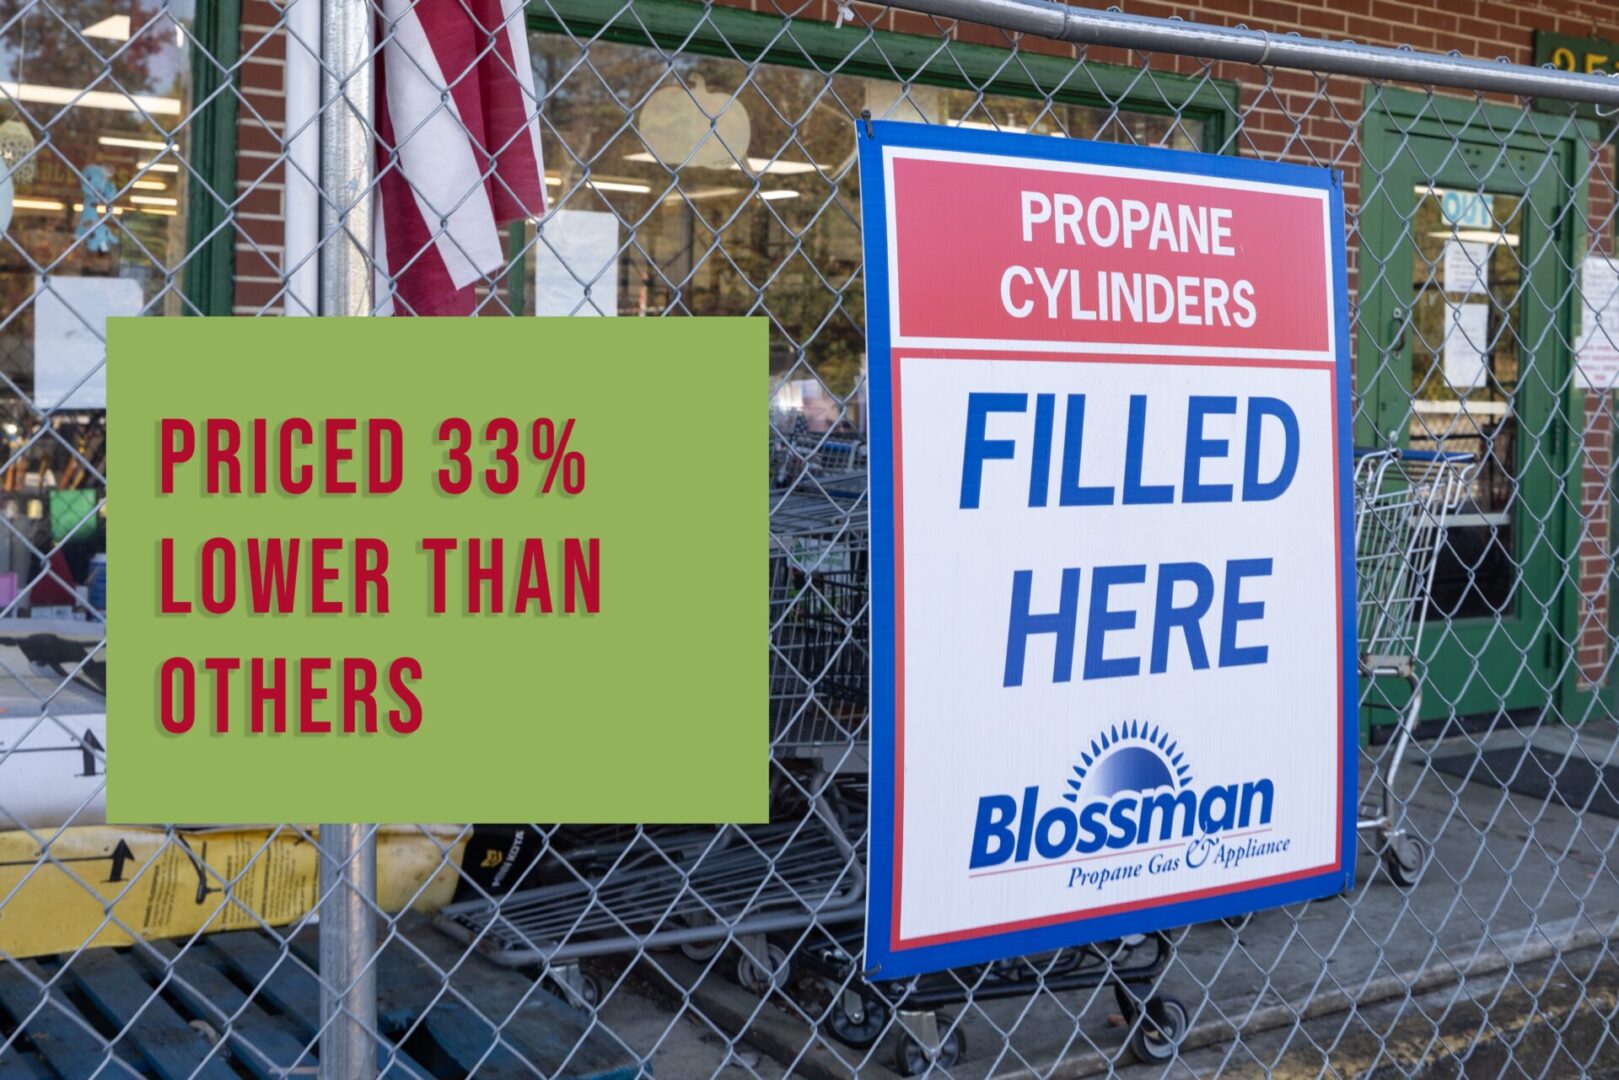 A sign that says, " propane cylinders filled here ".